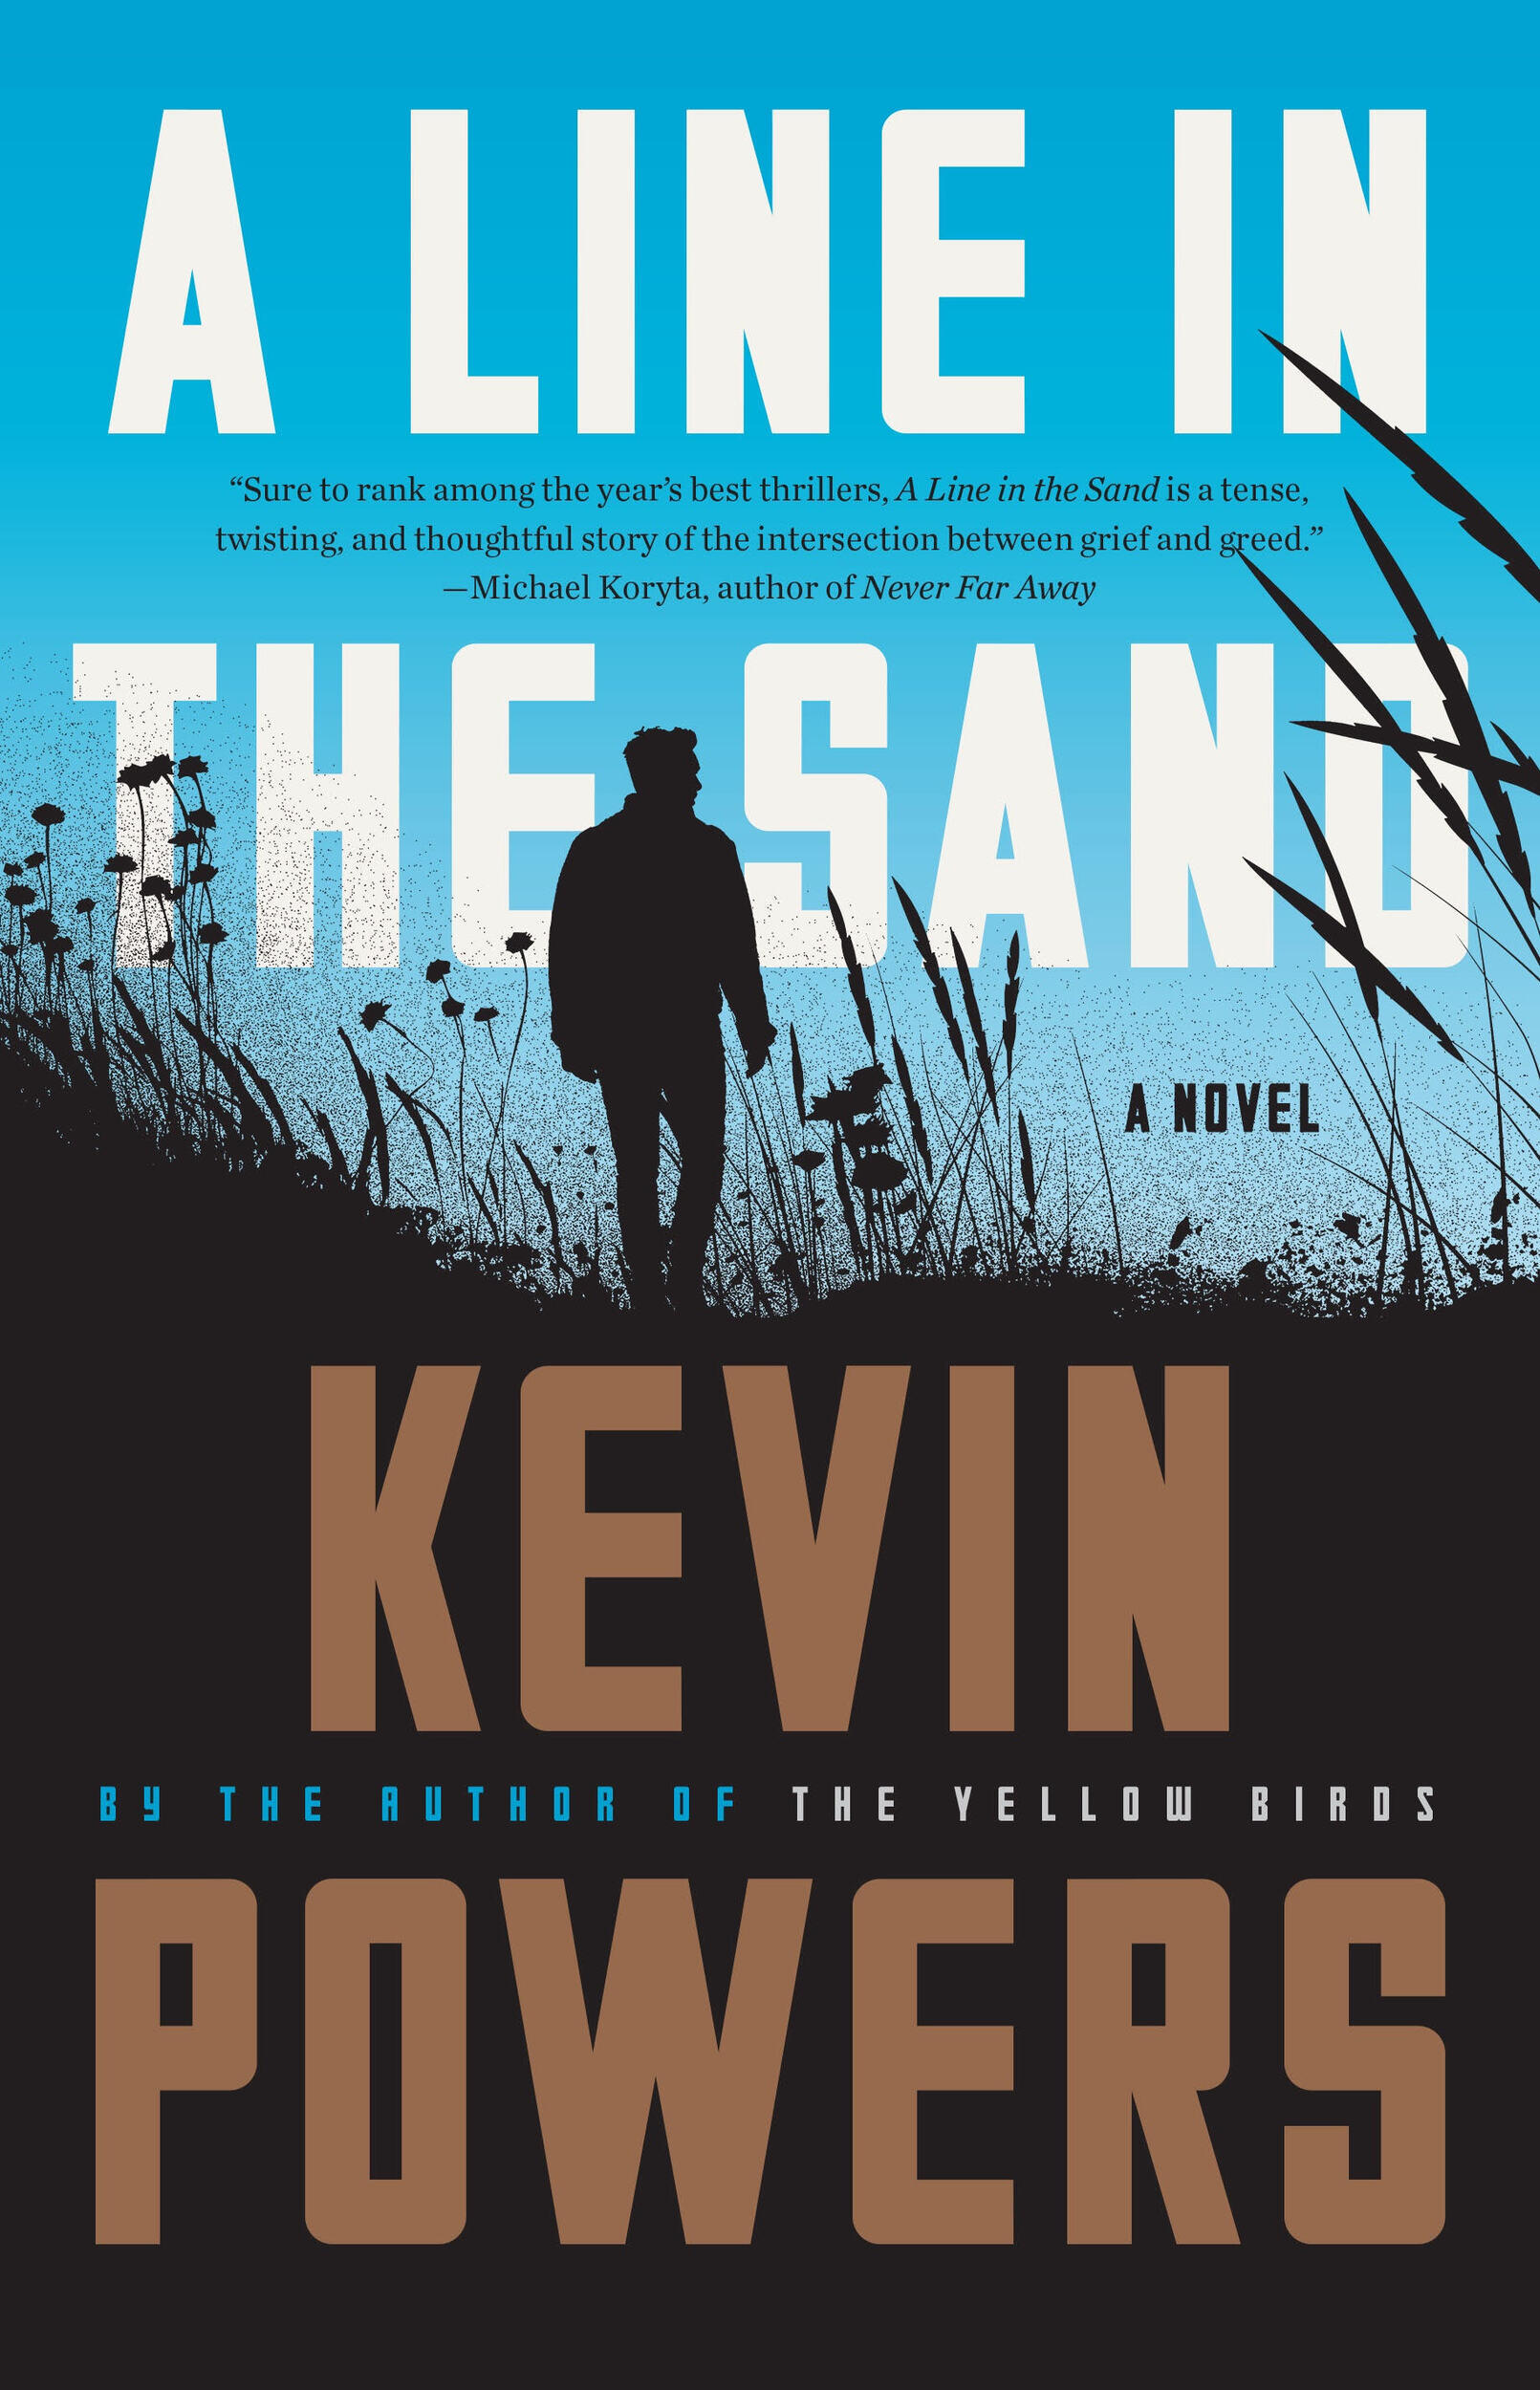 A book cover that has an illustration of a man walking through a field. While text reads \"A LINE IN THE SAND\" and brown text underneath reads \"KEVIN POWERS>\" 